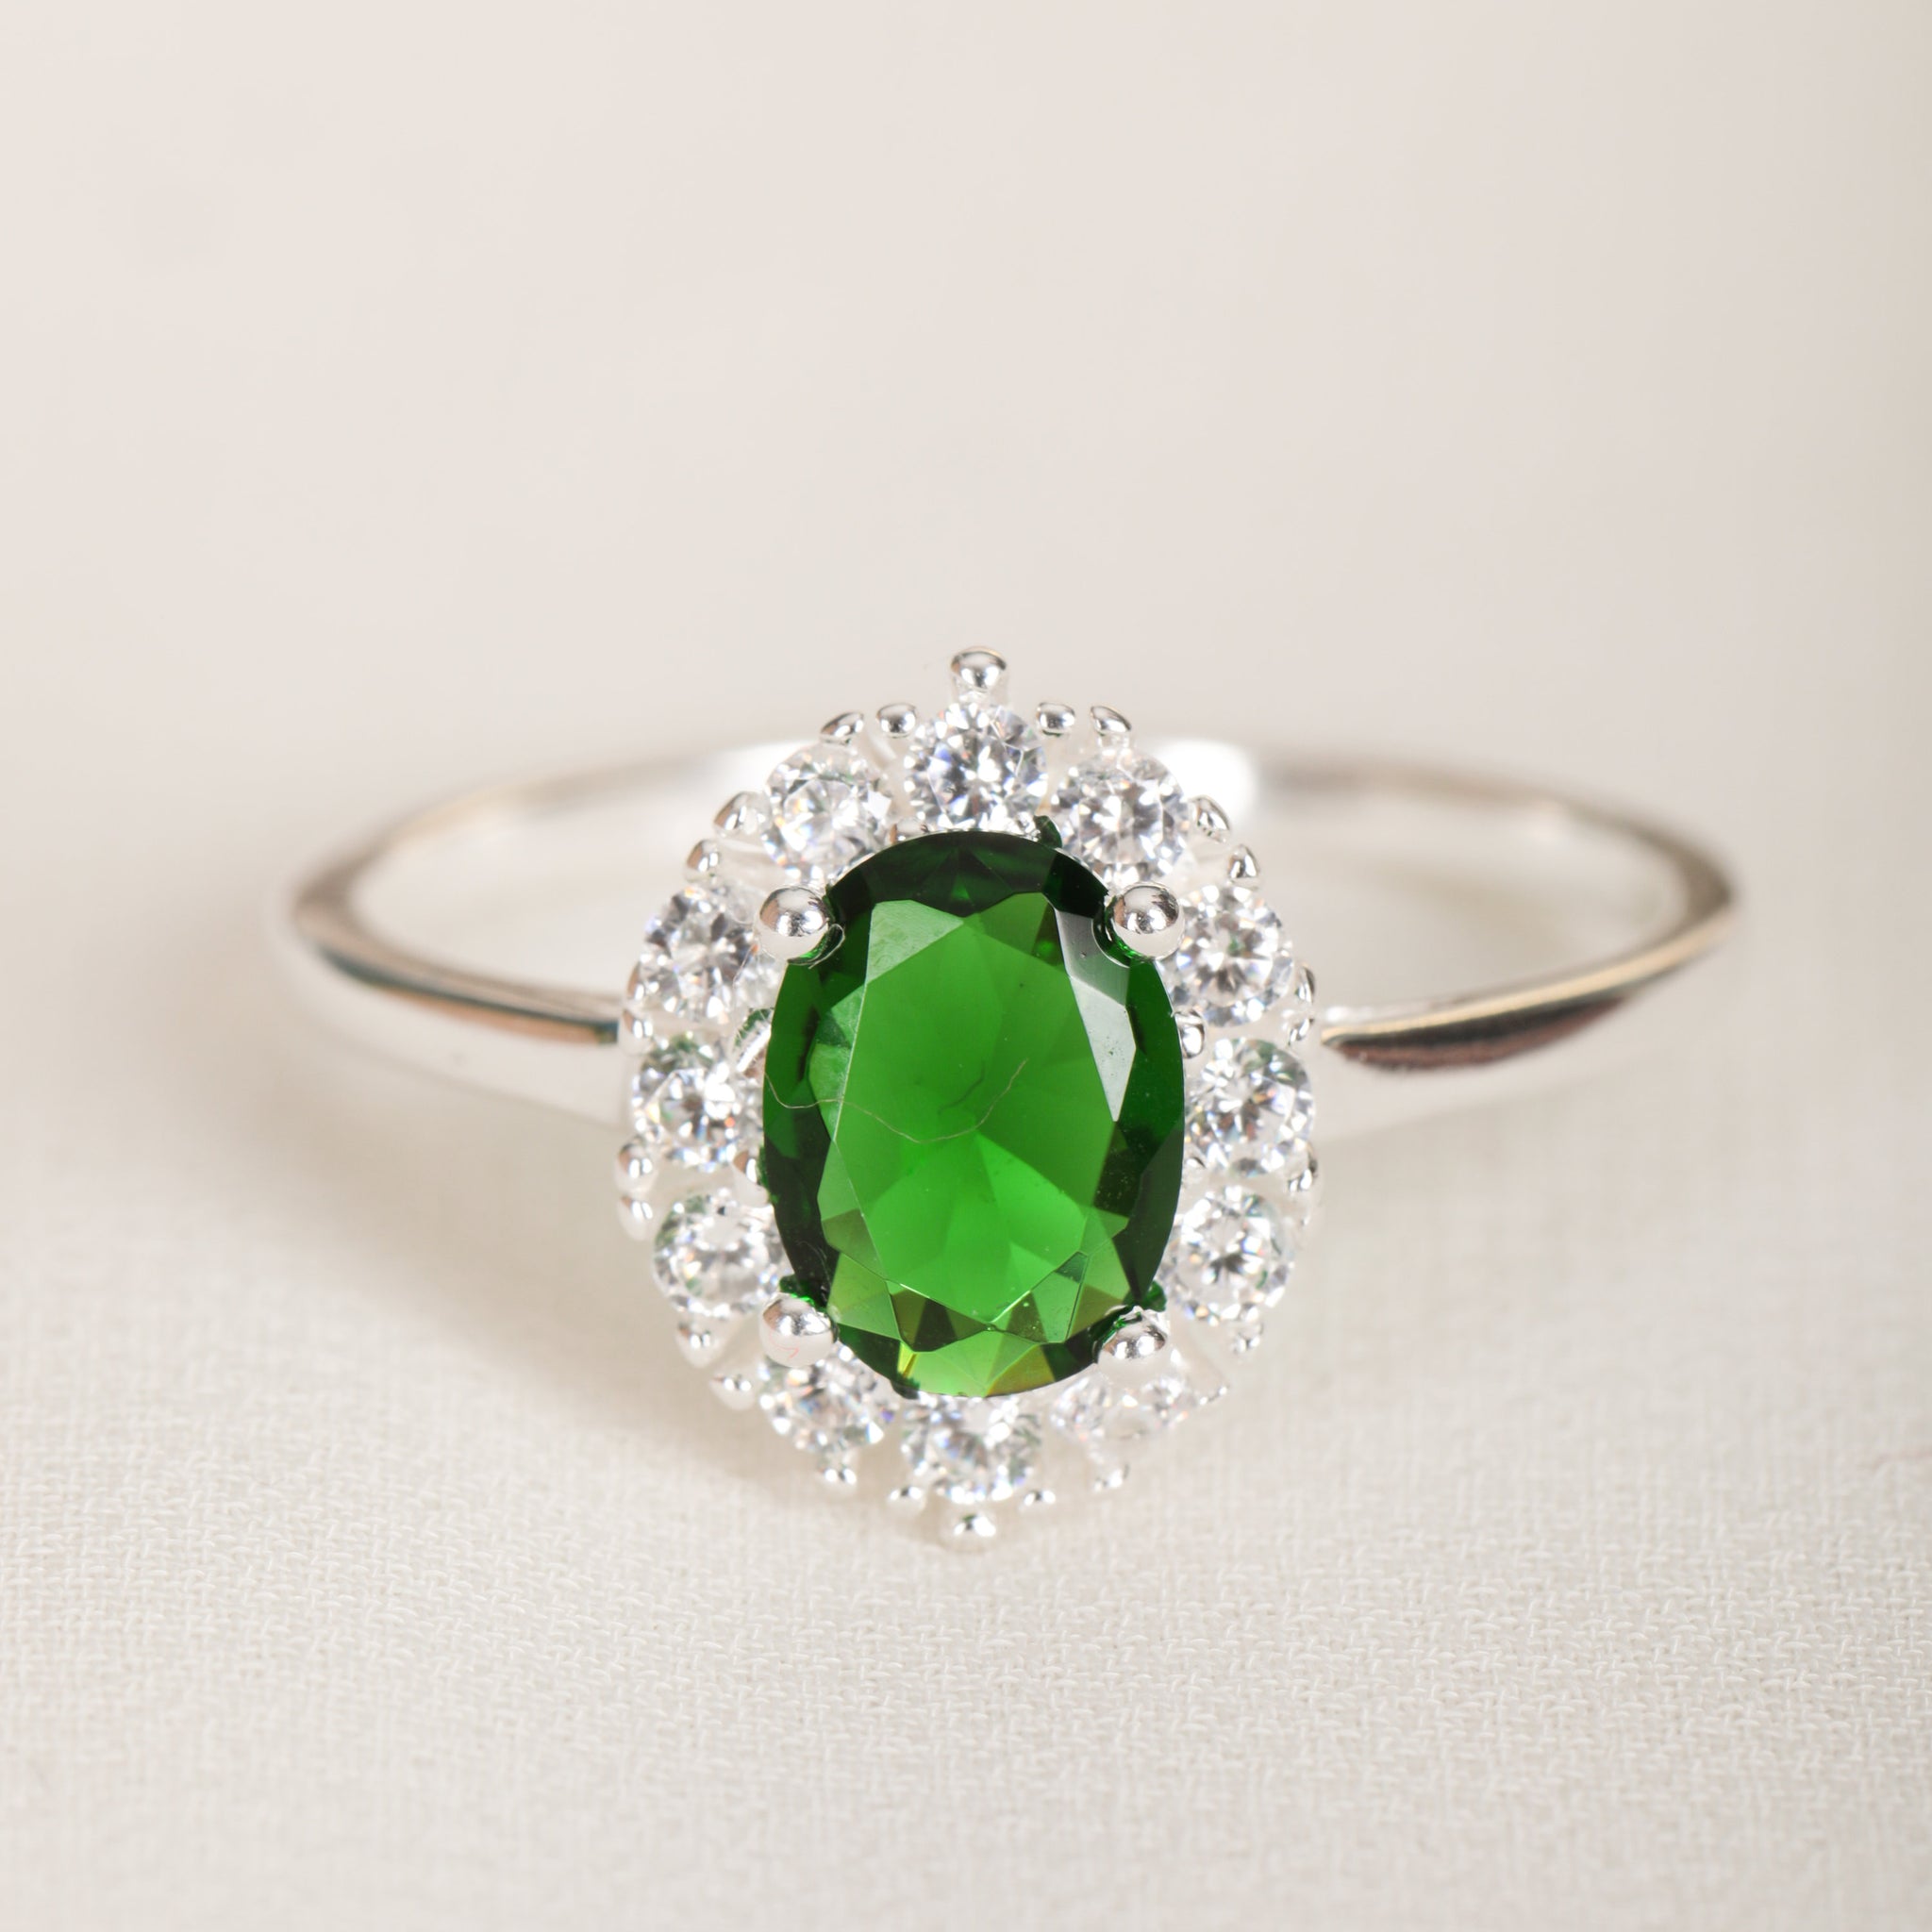 Dainty Emerald Art Deco Ring Engagement Green Emerald Ring Dainty Oval Emerald Ring May Birthstone Ring Promise Ring